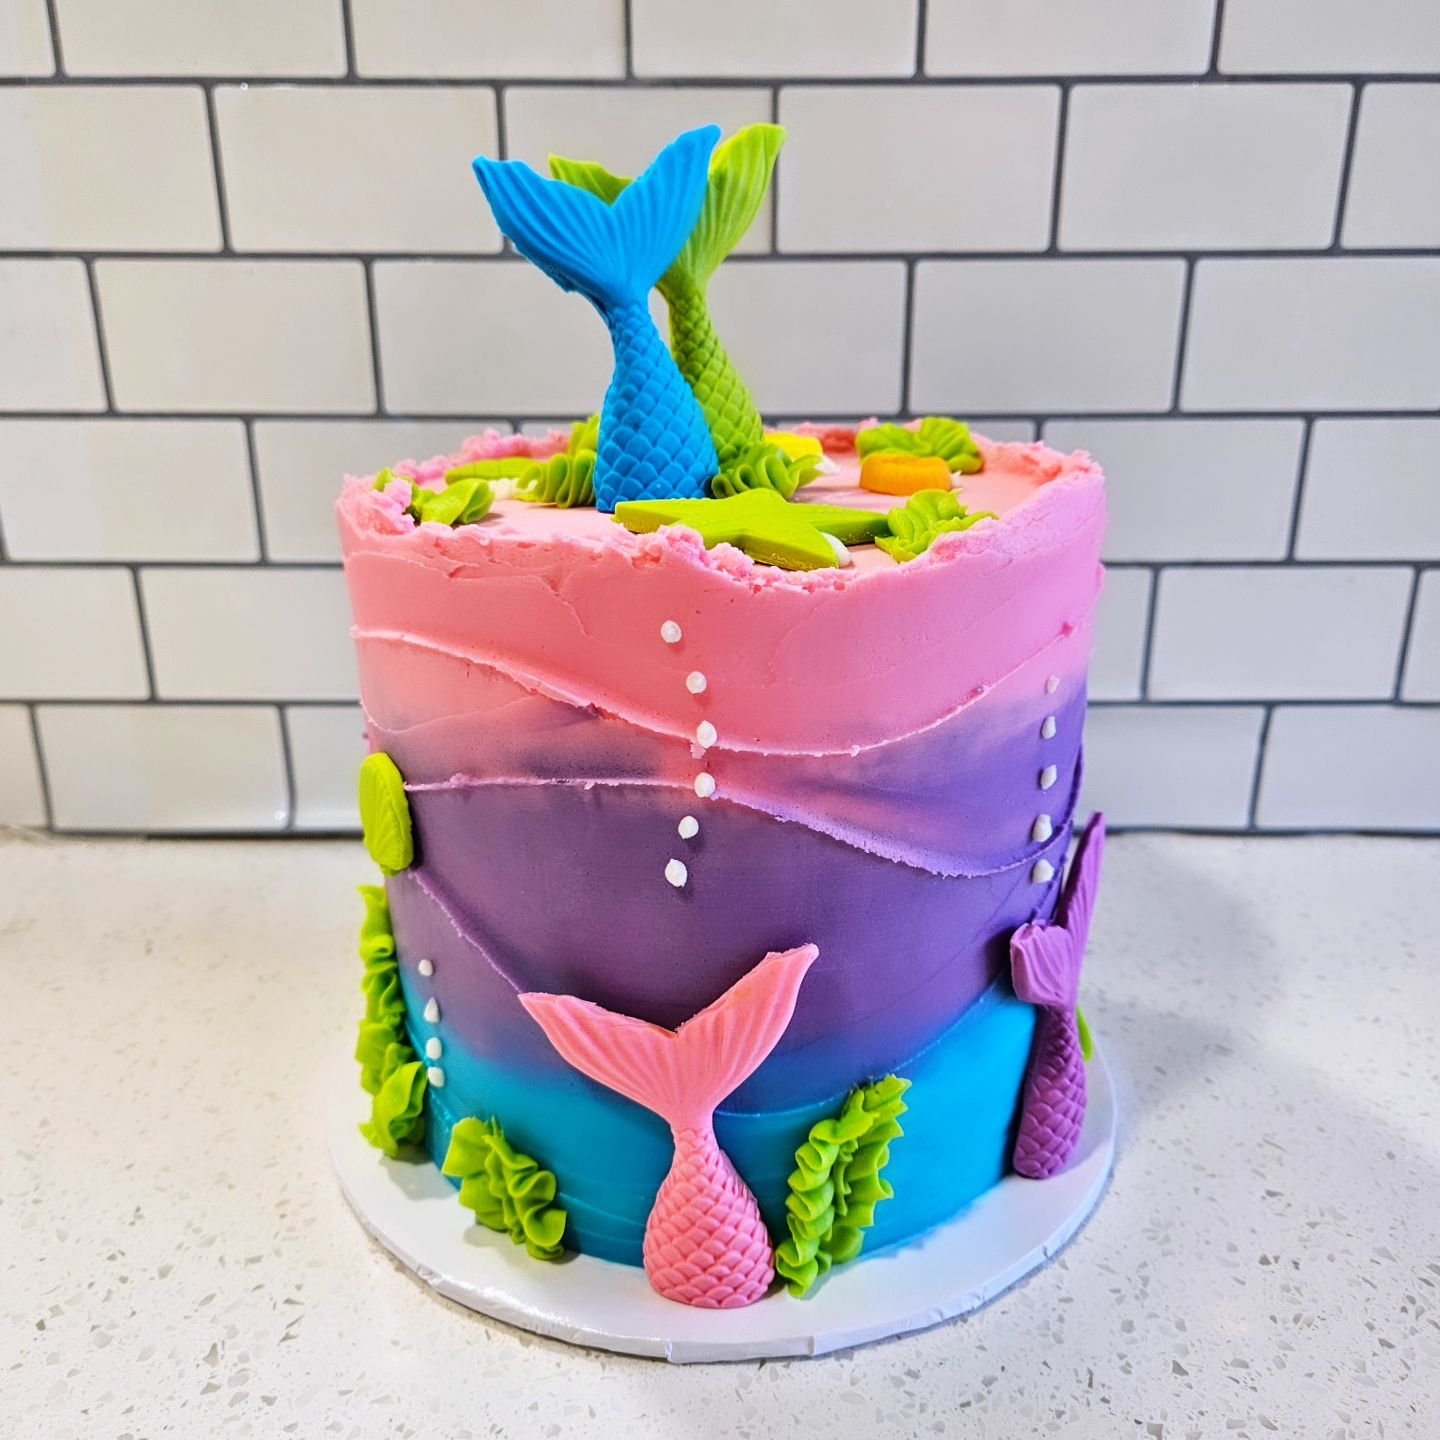 Anyone else go to bed early and miss all the action last night? Hoping tonight is just as good 🤞🏻
.
.
.
#mermaid #mermaidcake #undertheseacake #2024cake #cake #cakedecorating #cakesofinstagram #cakedesign #cakestagram #cakeart #buttercream #butterc